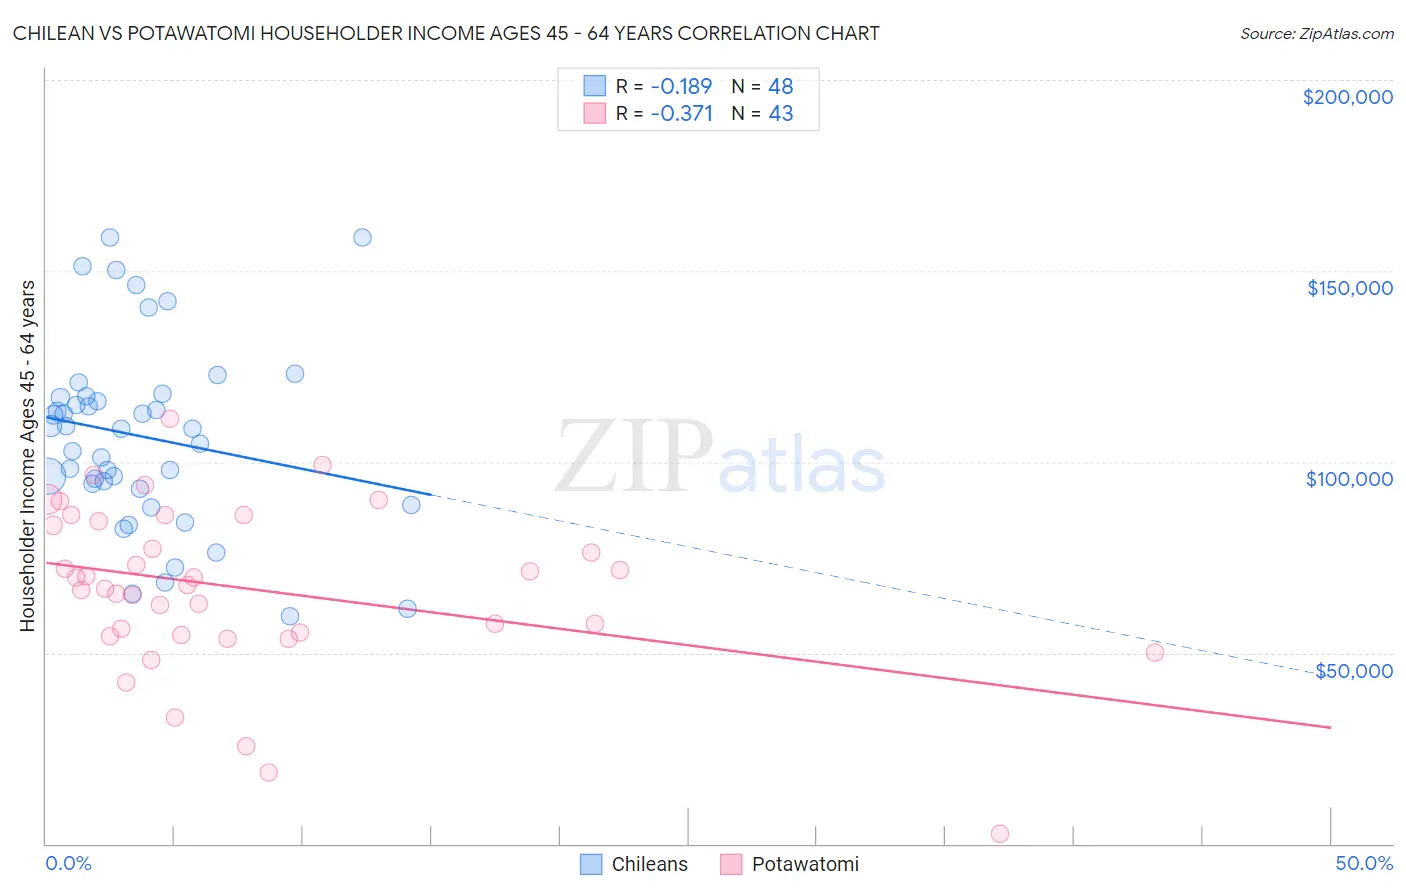 Chilean vs Potawatomi Householder Income Ages 45 - 64 years